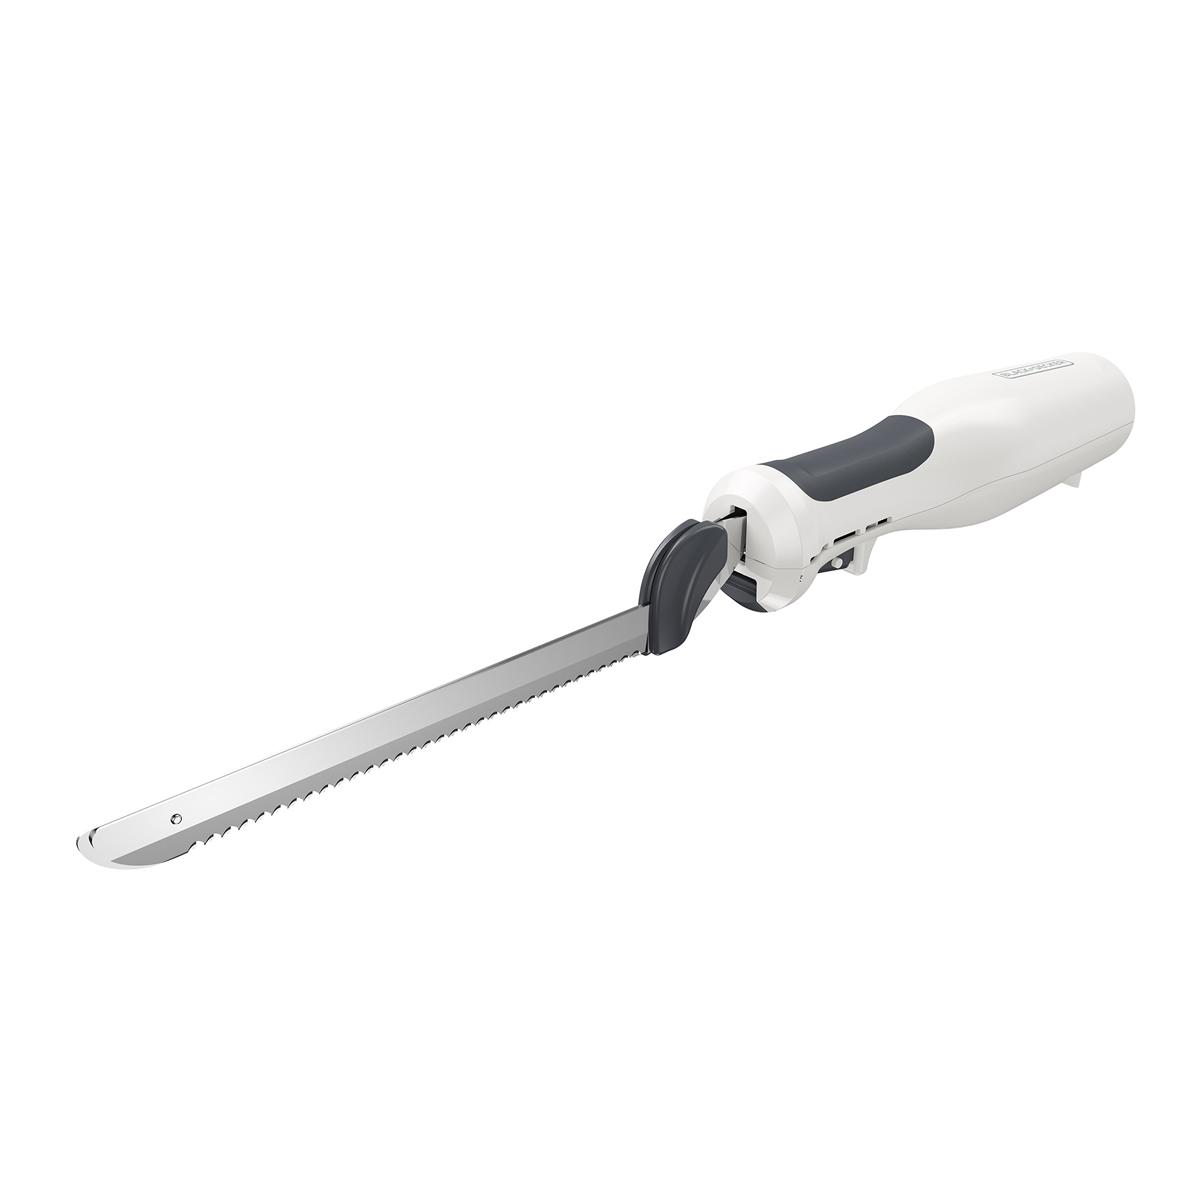 Black and Decker 9in Electric Carving Knife for $8.84